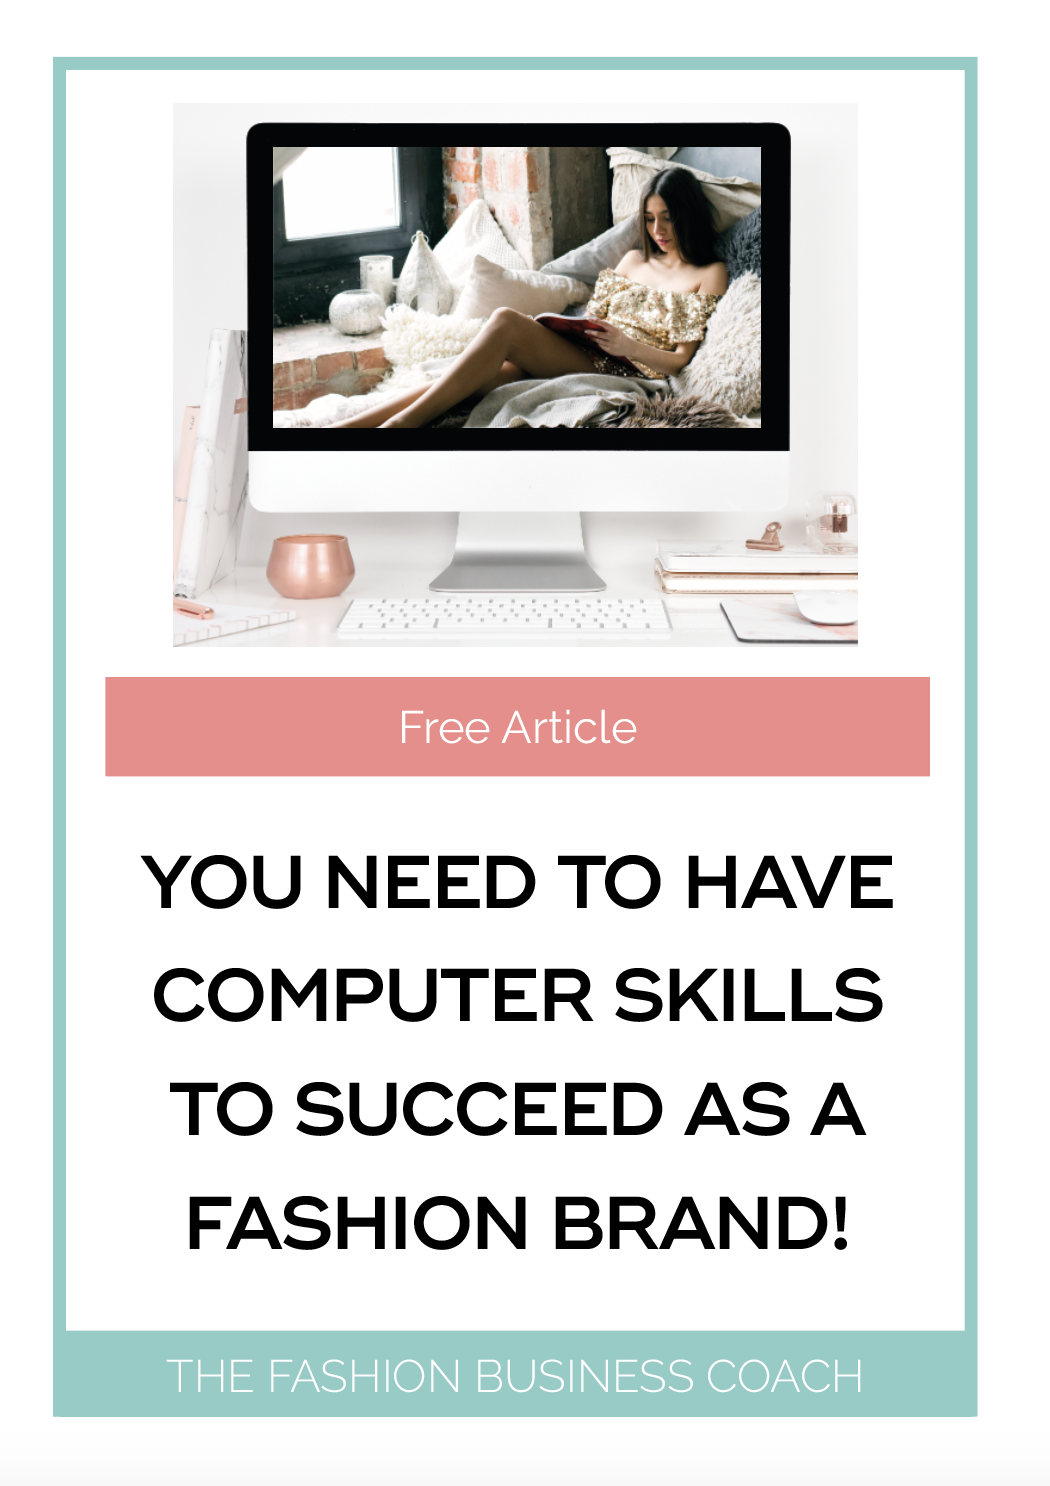 You need to have computer skills to succeed as a fashion brand! 1.png